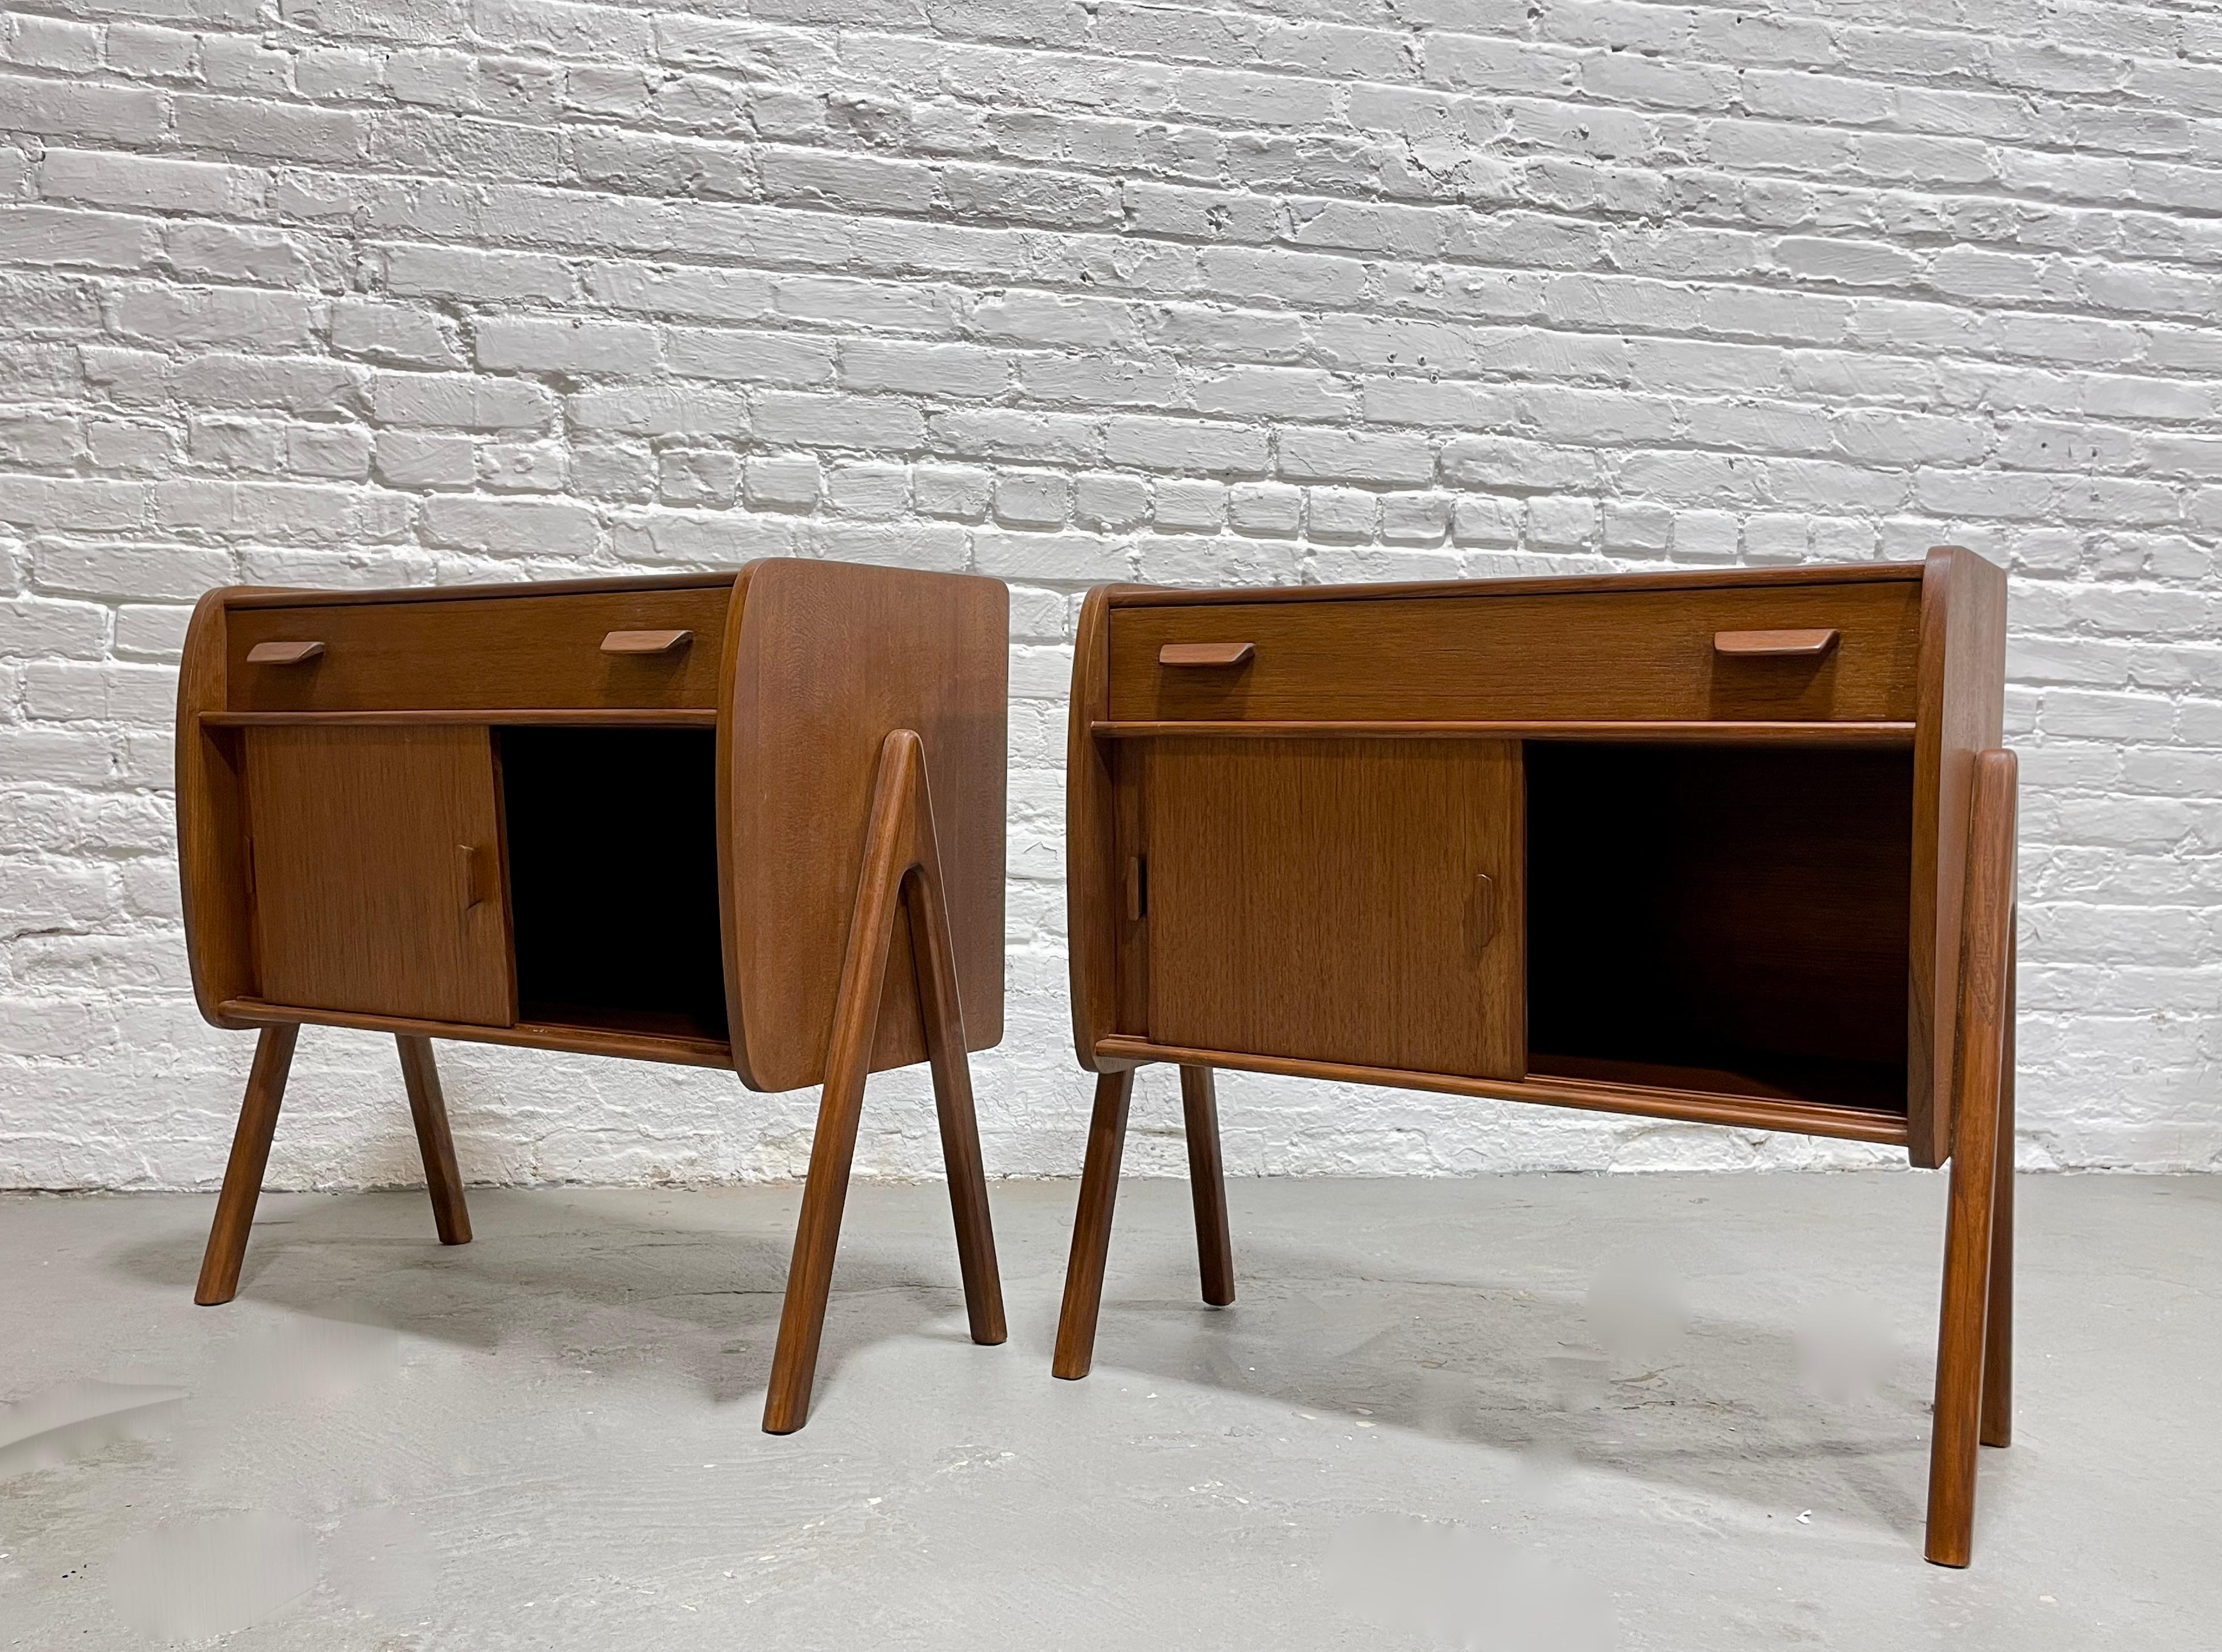 Contemporary Pair of Handmade Mid-Century Modern Teak Cabinets / Nightstands / Bedside Tables